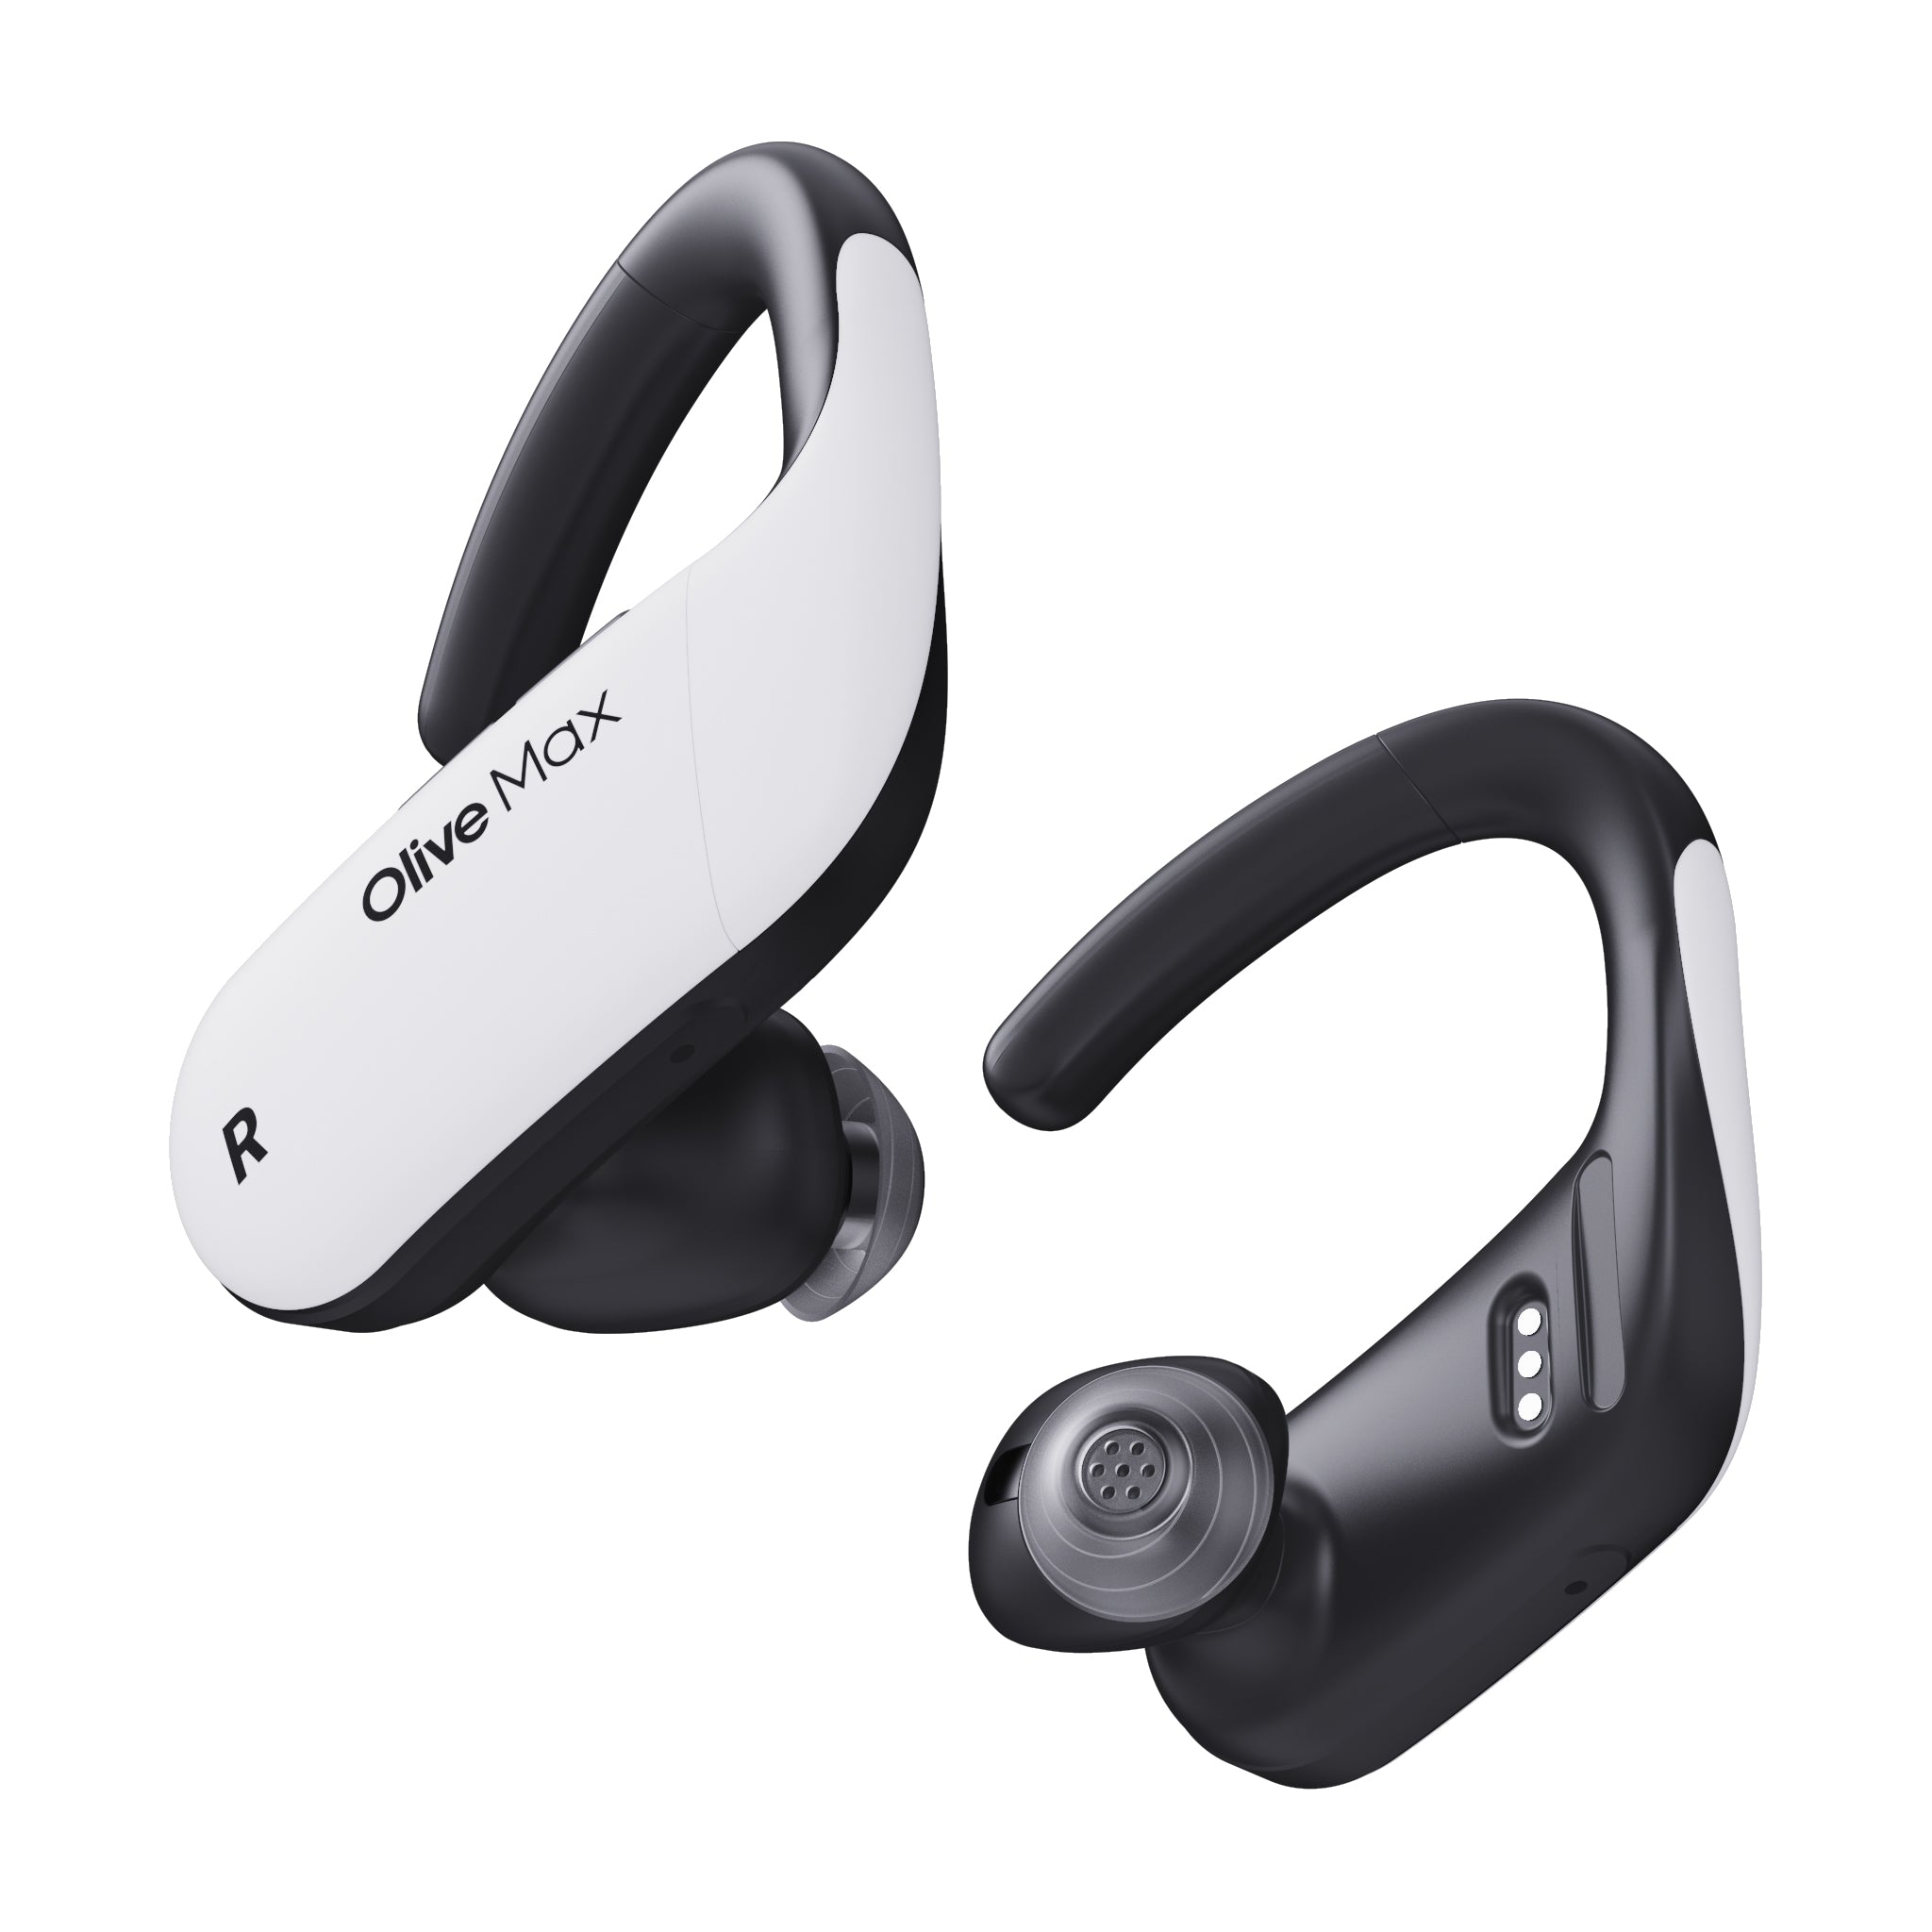 Olive Max OTC hearing aids : Louder, clearer sound, rechargeable 